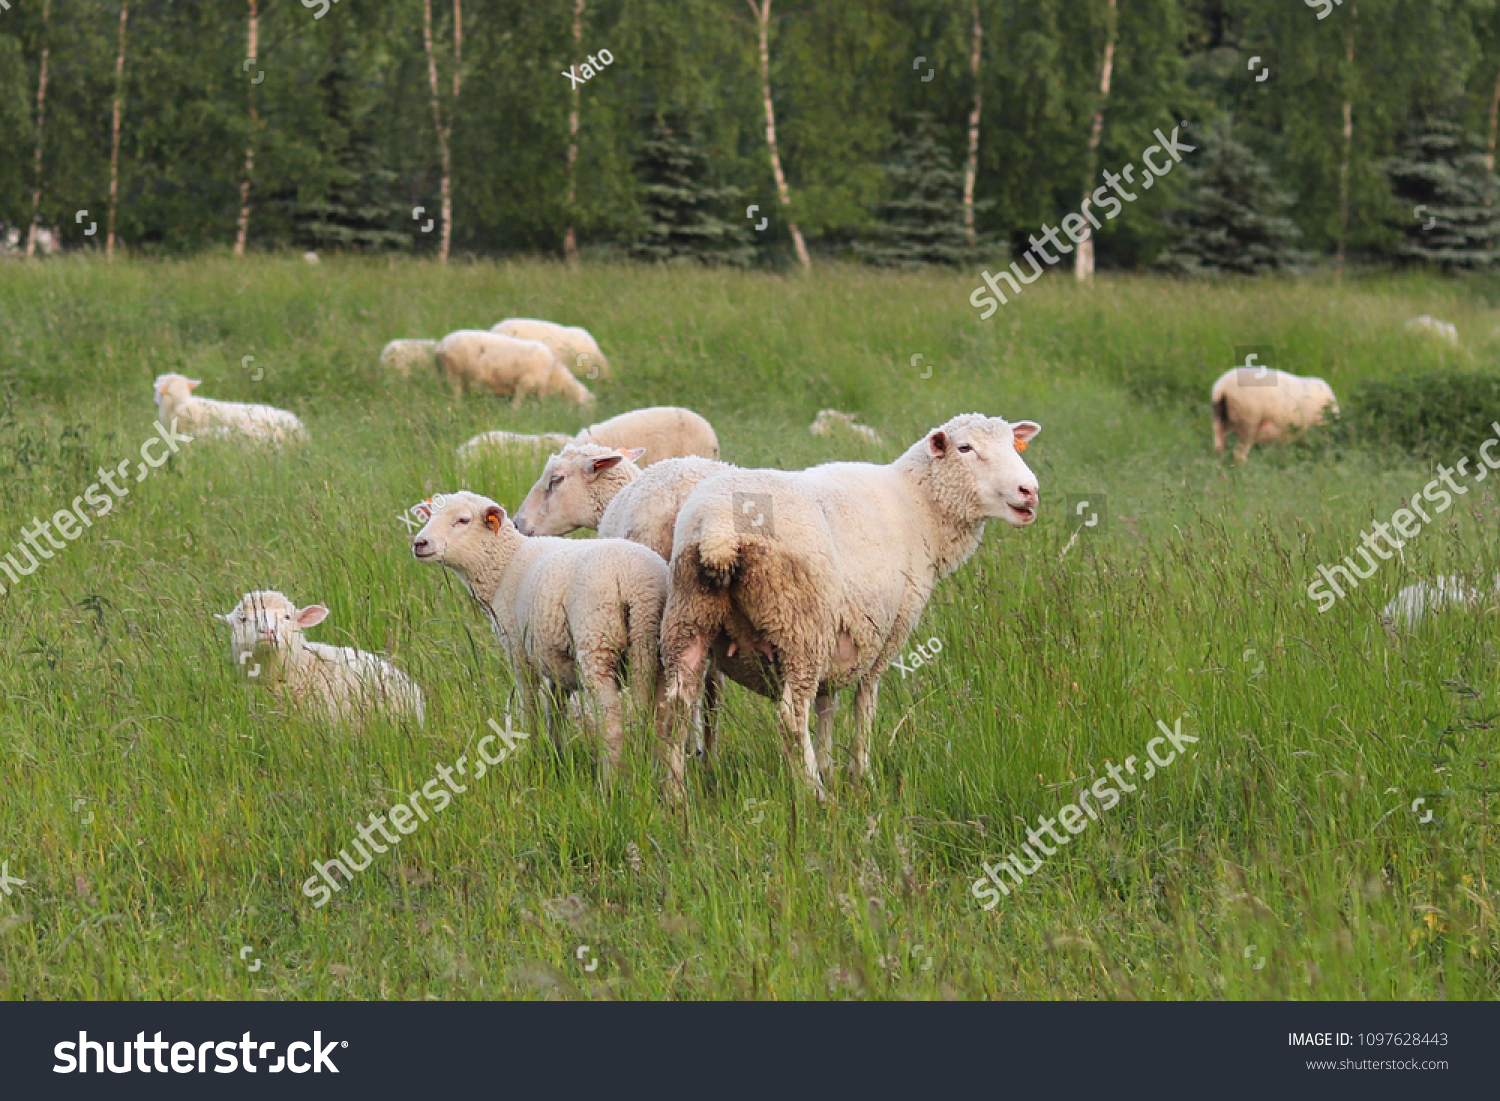 A herd of clear sheep color graze in a meadow with a tall green lush grass. Pasture of a farm with construction and trees. Industrial livestock. Livestock. Source of income of rural residents. #1097628443